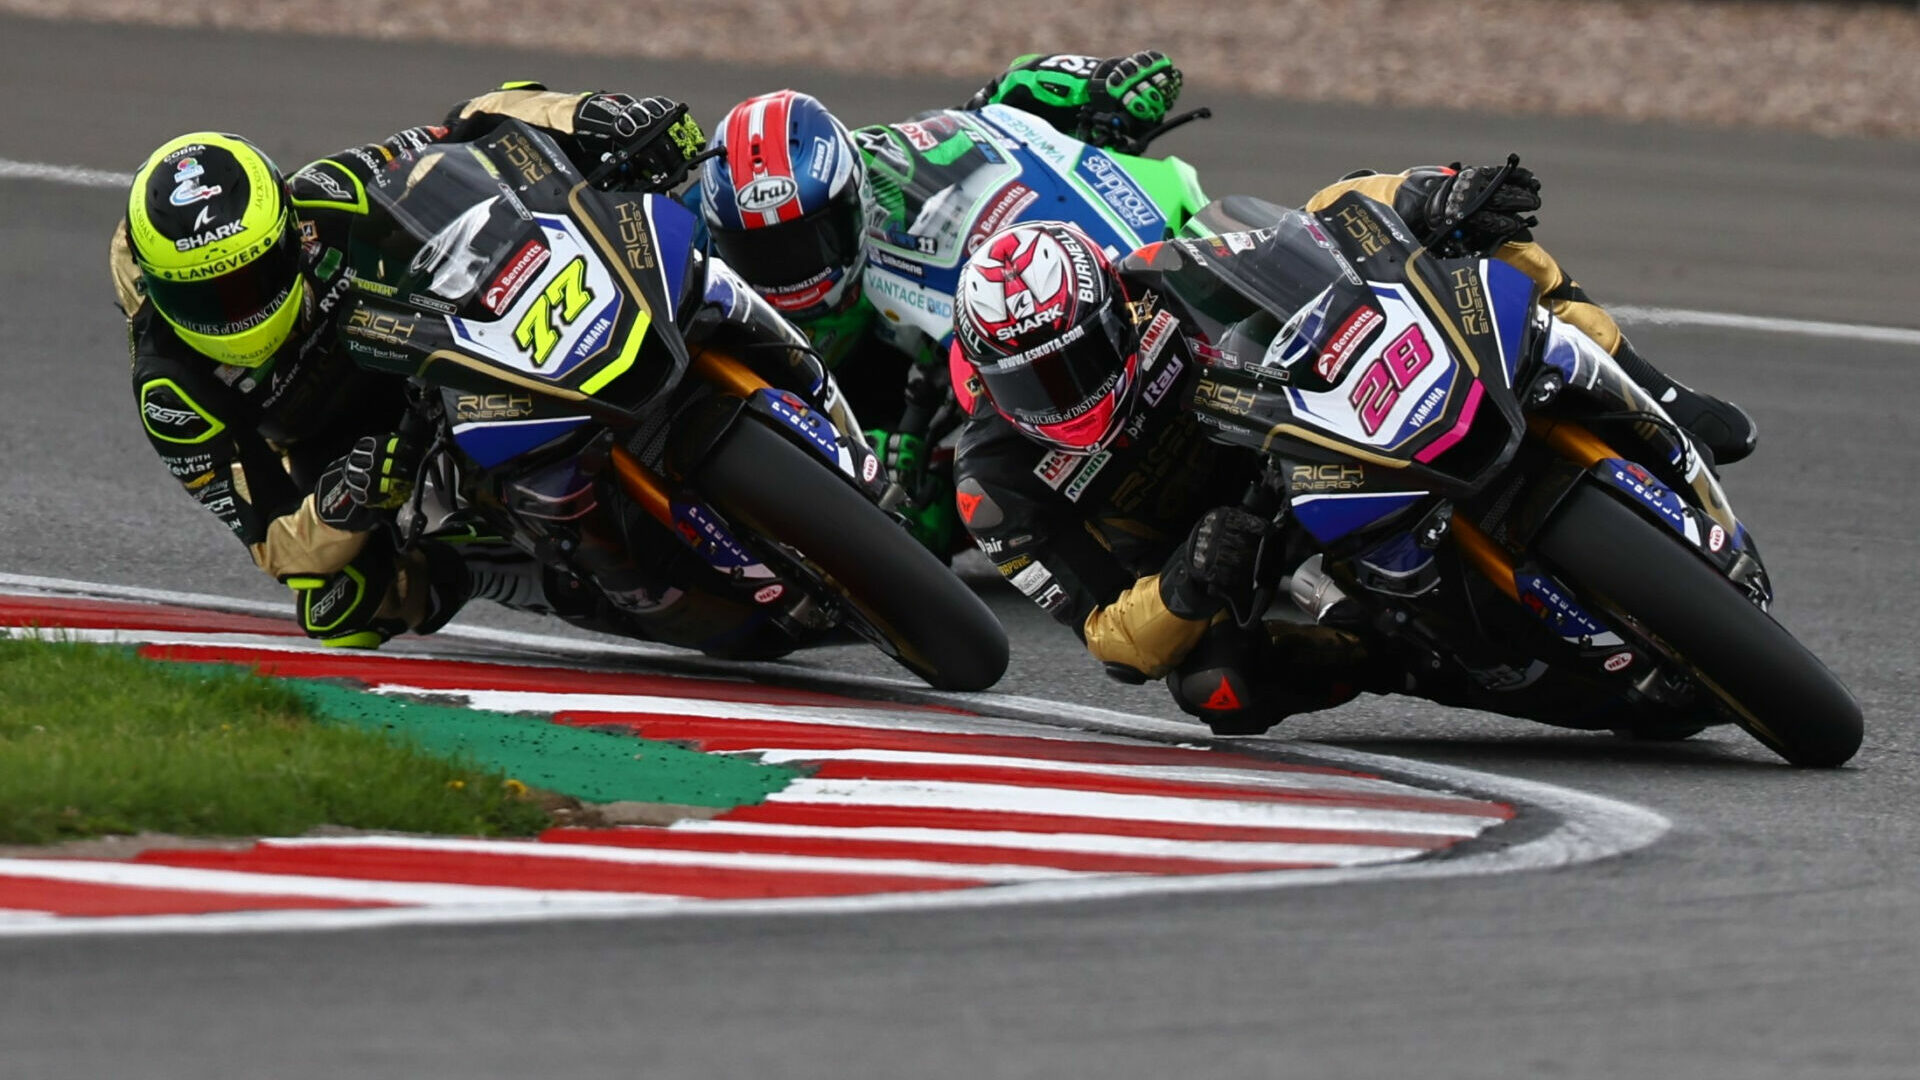 Bradley Ray (28), Kyle Ryde (77), and Rory Skinner in action during a British Superbike race. Photo courtesy MSVR.